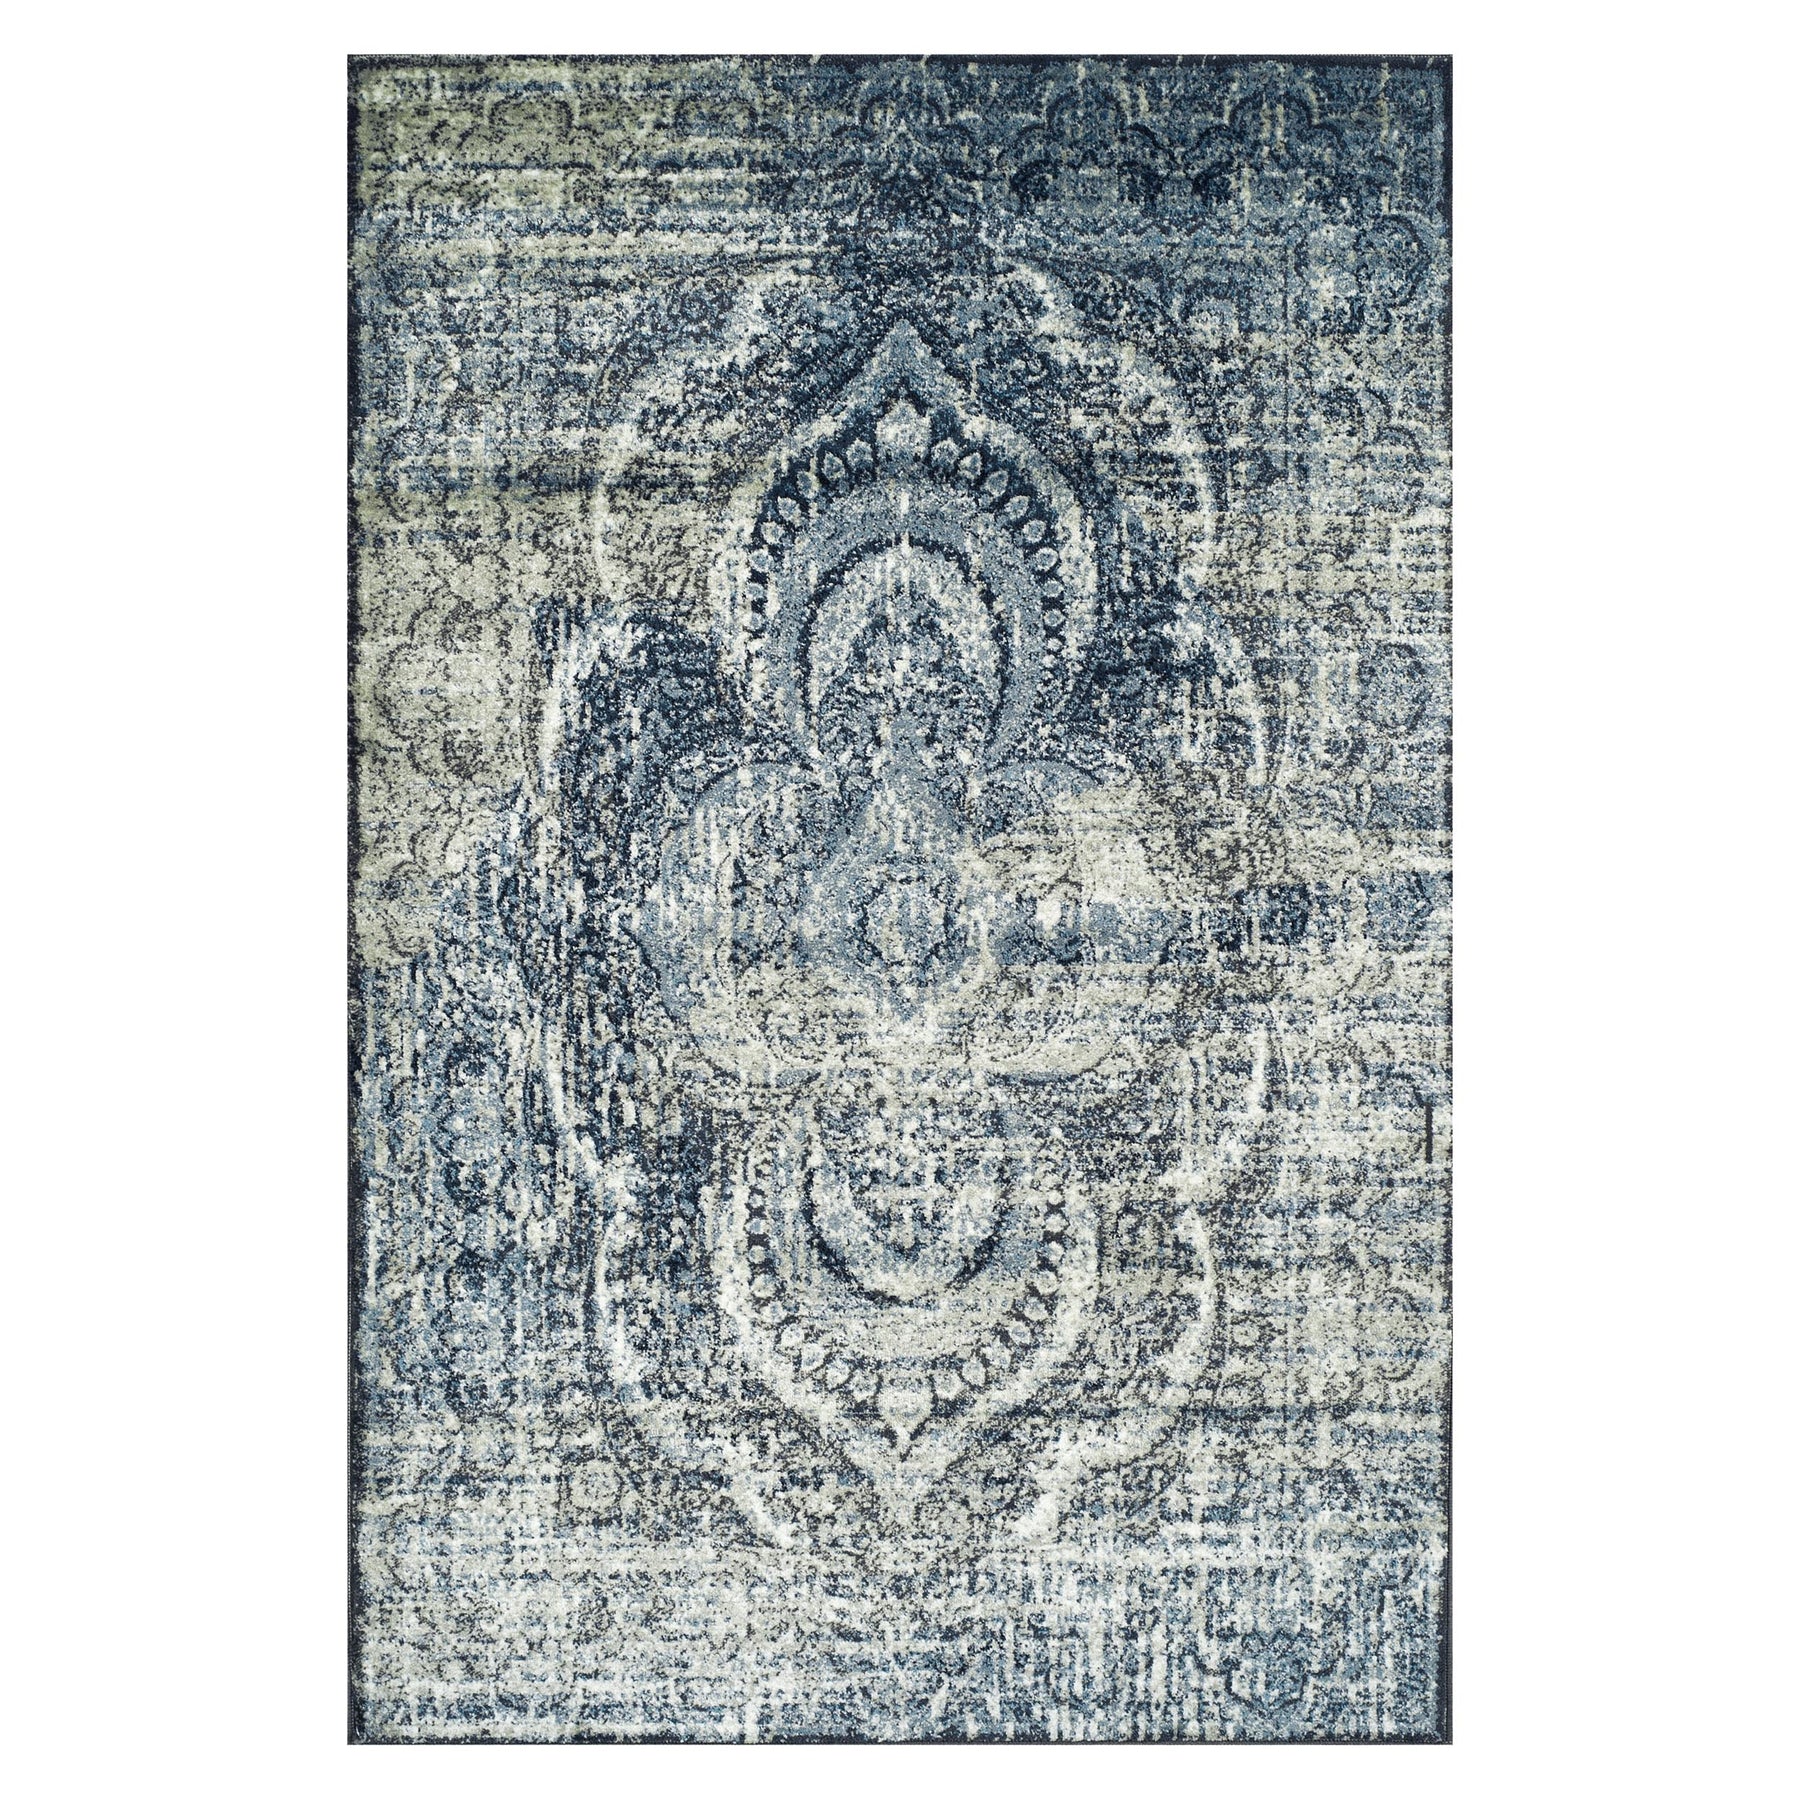  Superior Salford Moroccan Pattern Indoor 2' 7 x 8' Runner Rug  for Living - Dining Room, Bedroom, Kitchen, Under Table, Elegant, Soft  Durable Rugs for Home and Office, On Tile 